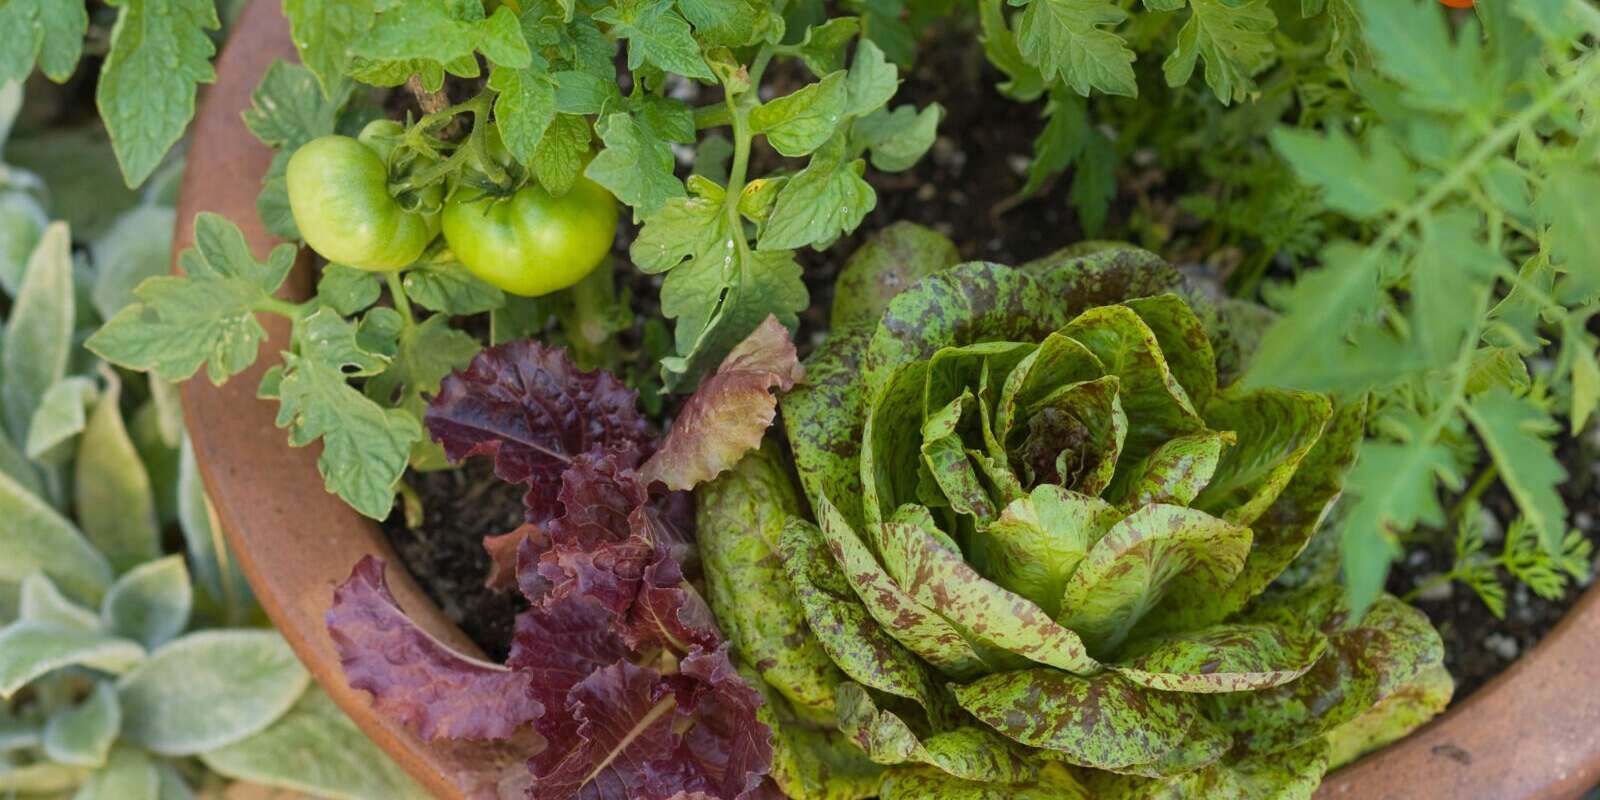 The 14 Easiest Vegetables, Fruits, and Herbs Any New Gardener Can Grow